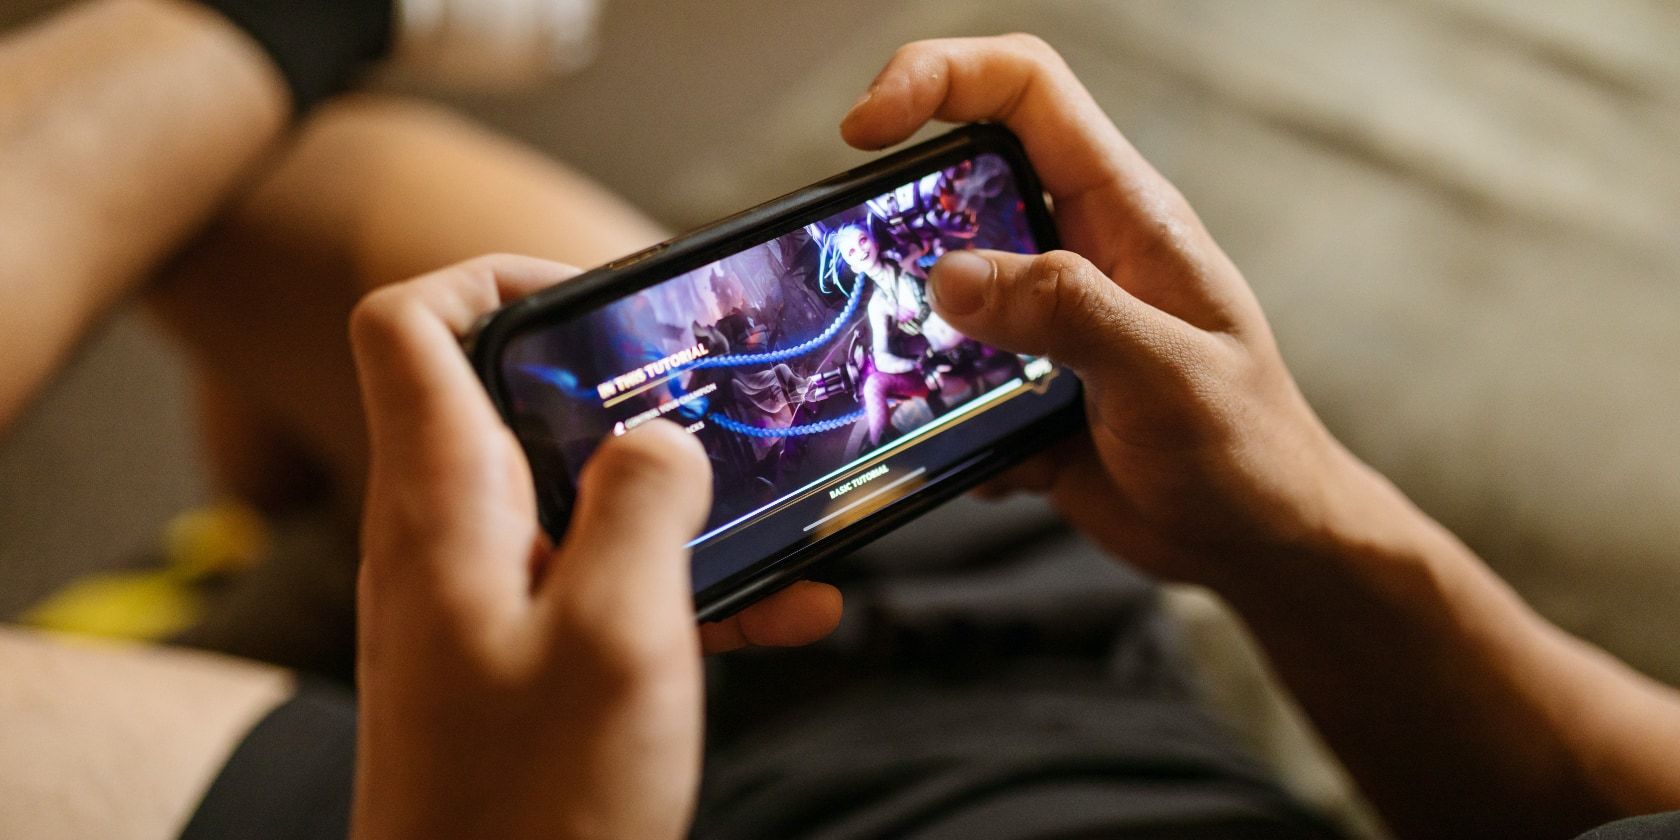 10 Free Multiplayer Games for Android That Can Be Played Offline